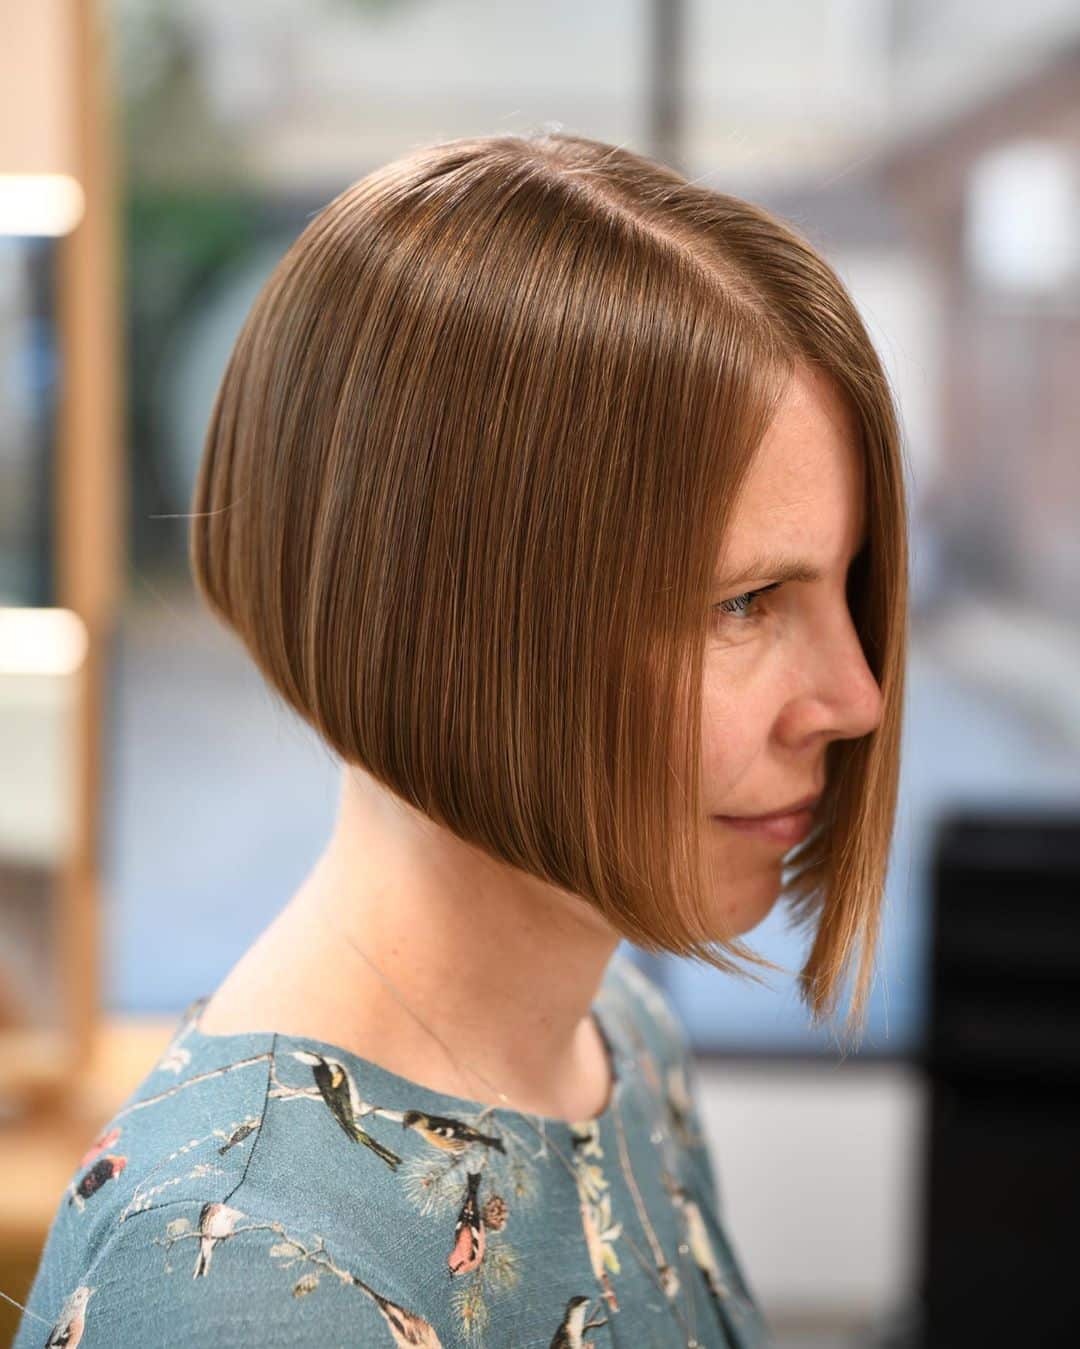 Classic Straight Bob Cut in Your 50s